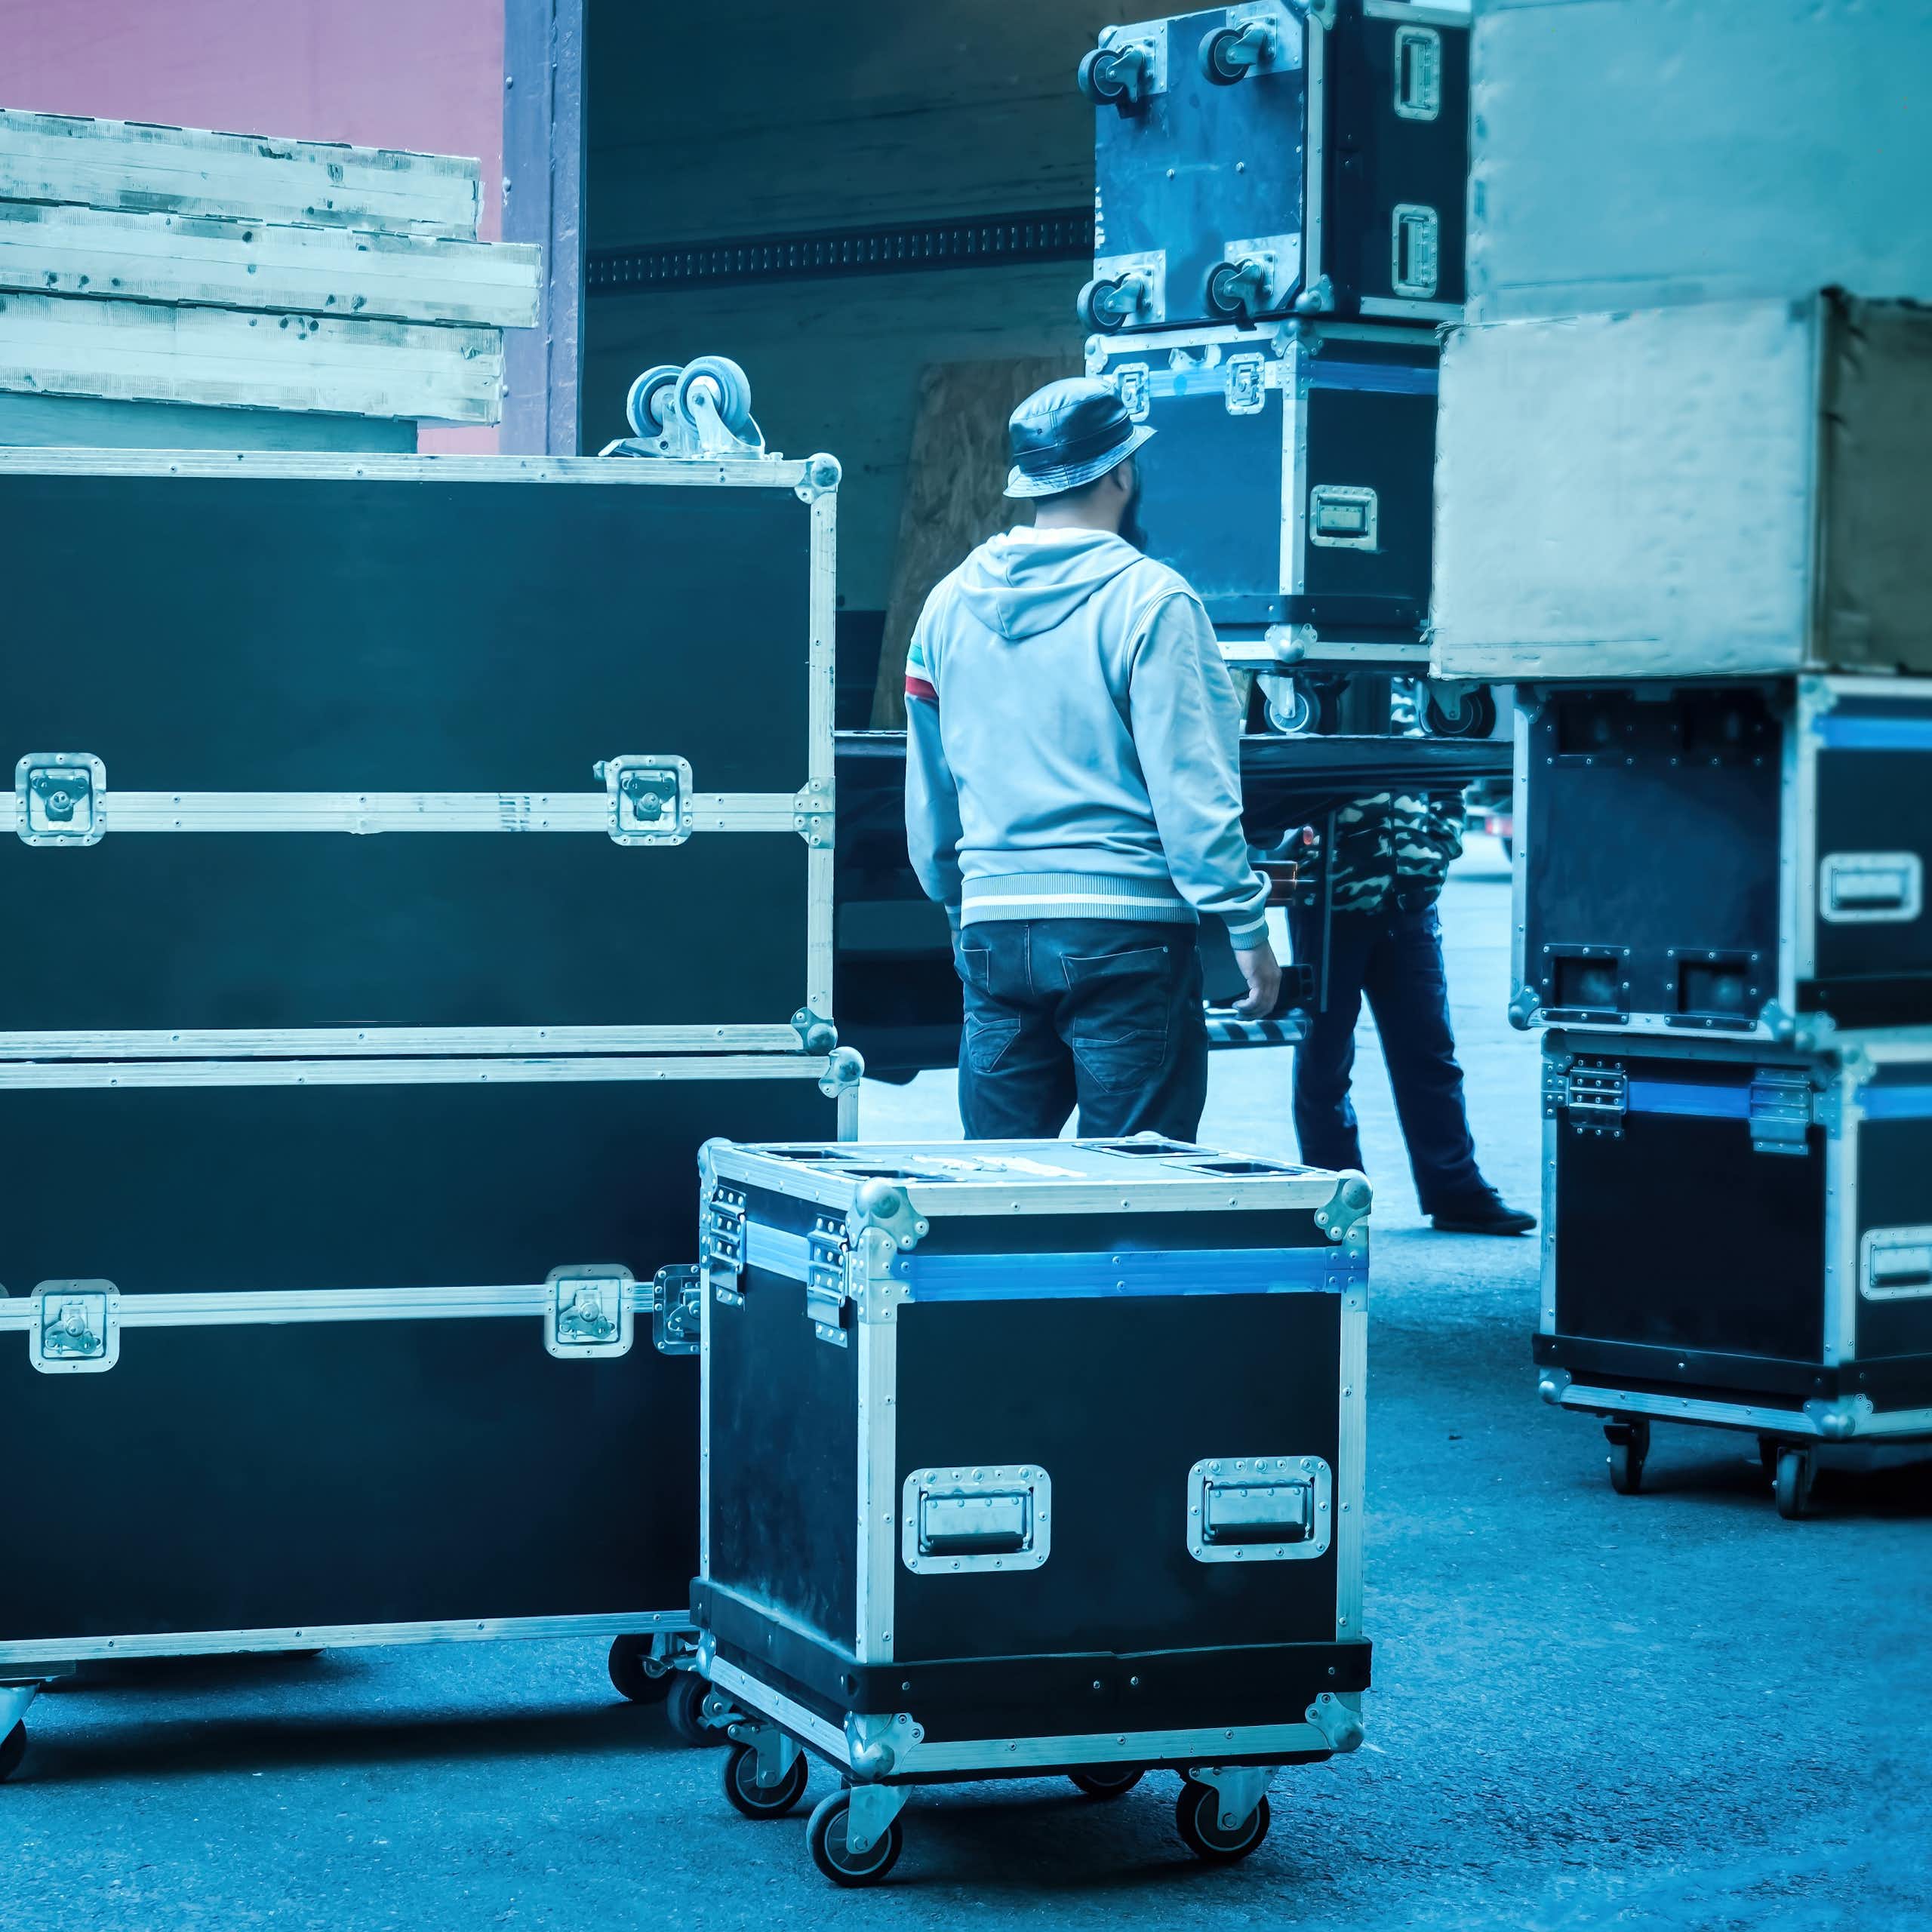 Roadies with travel boxes